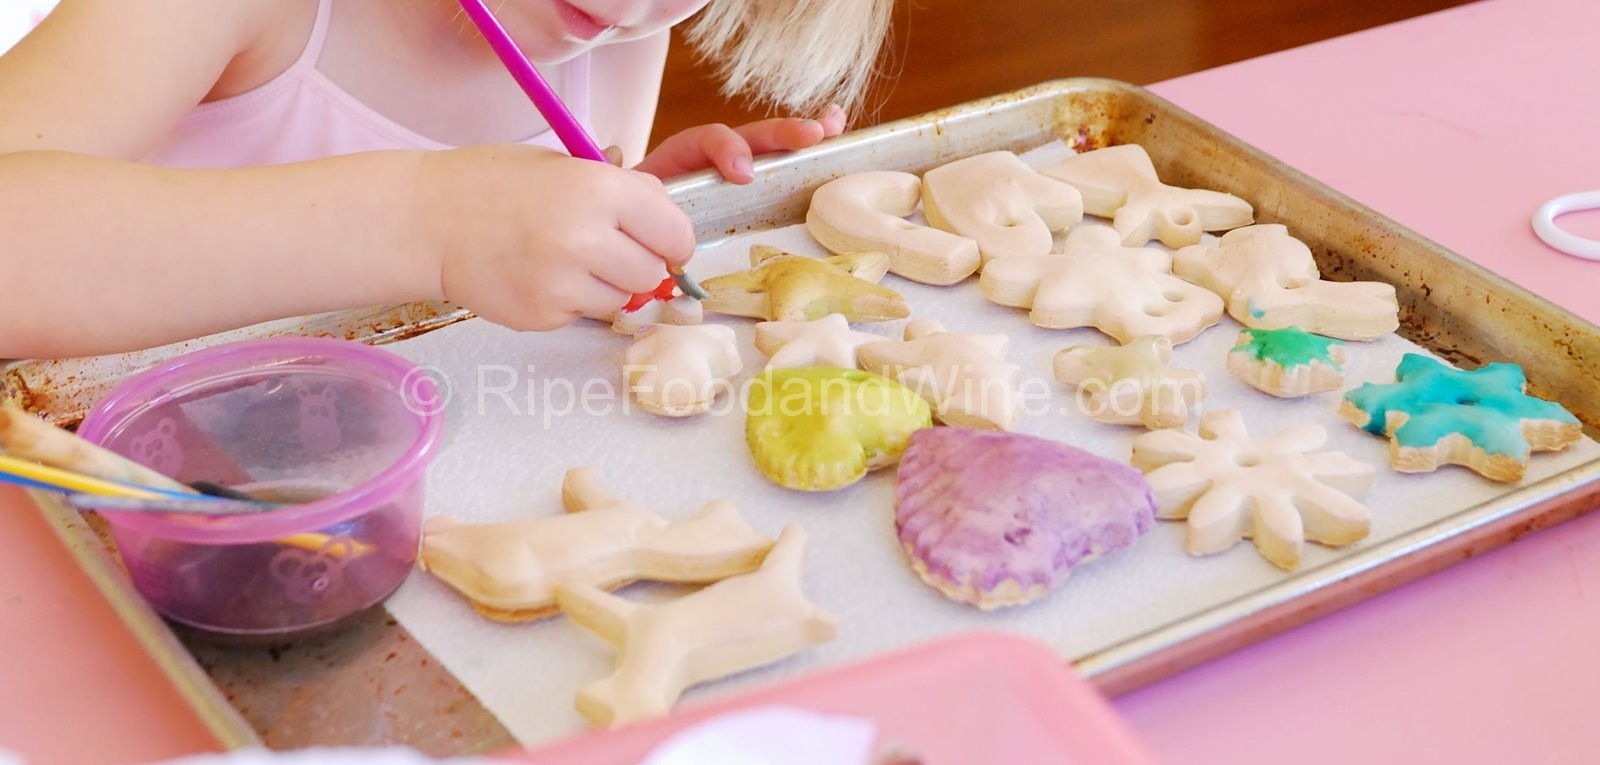 Baker’s Clay; Make it Yourself Play Dough